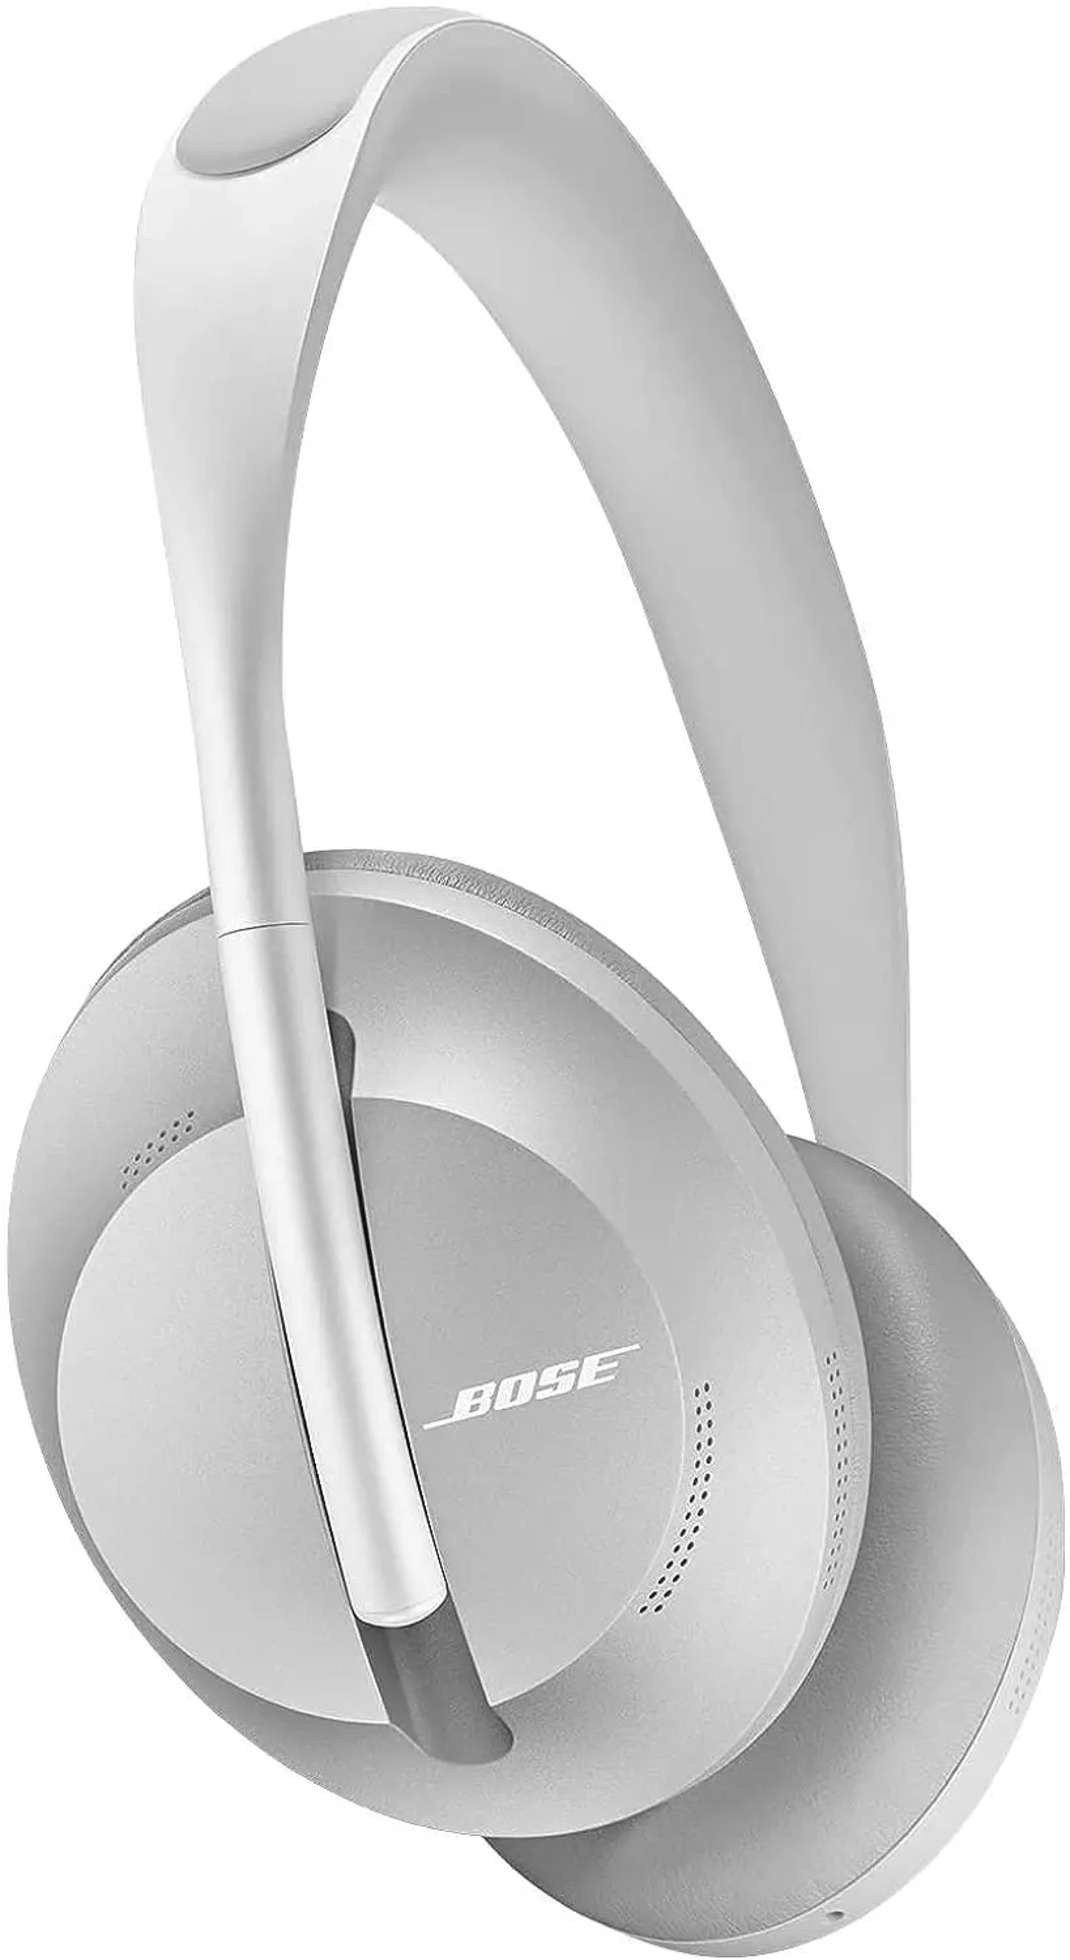 Compare Bose 700 with - 700 Headphones One Mic vs Over the Luxe) (Champagne Noise Bluetooth (Sliver Bluetooth M2 Tour Headphone Bluetooth Headphones JBL v5.3 Cancelling (Sliver Gold) Noise Ear Cancelling Bose